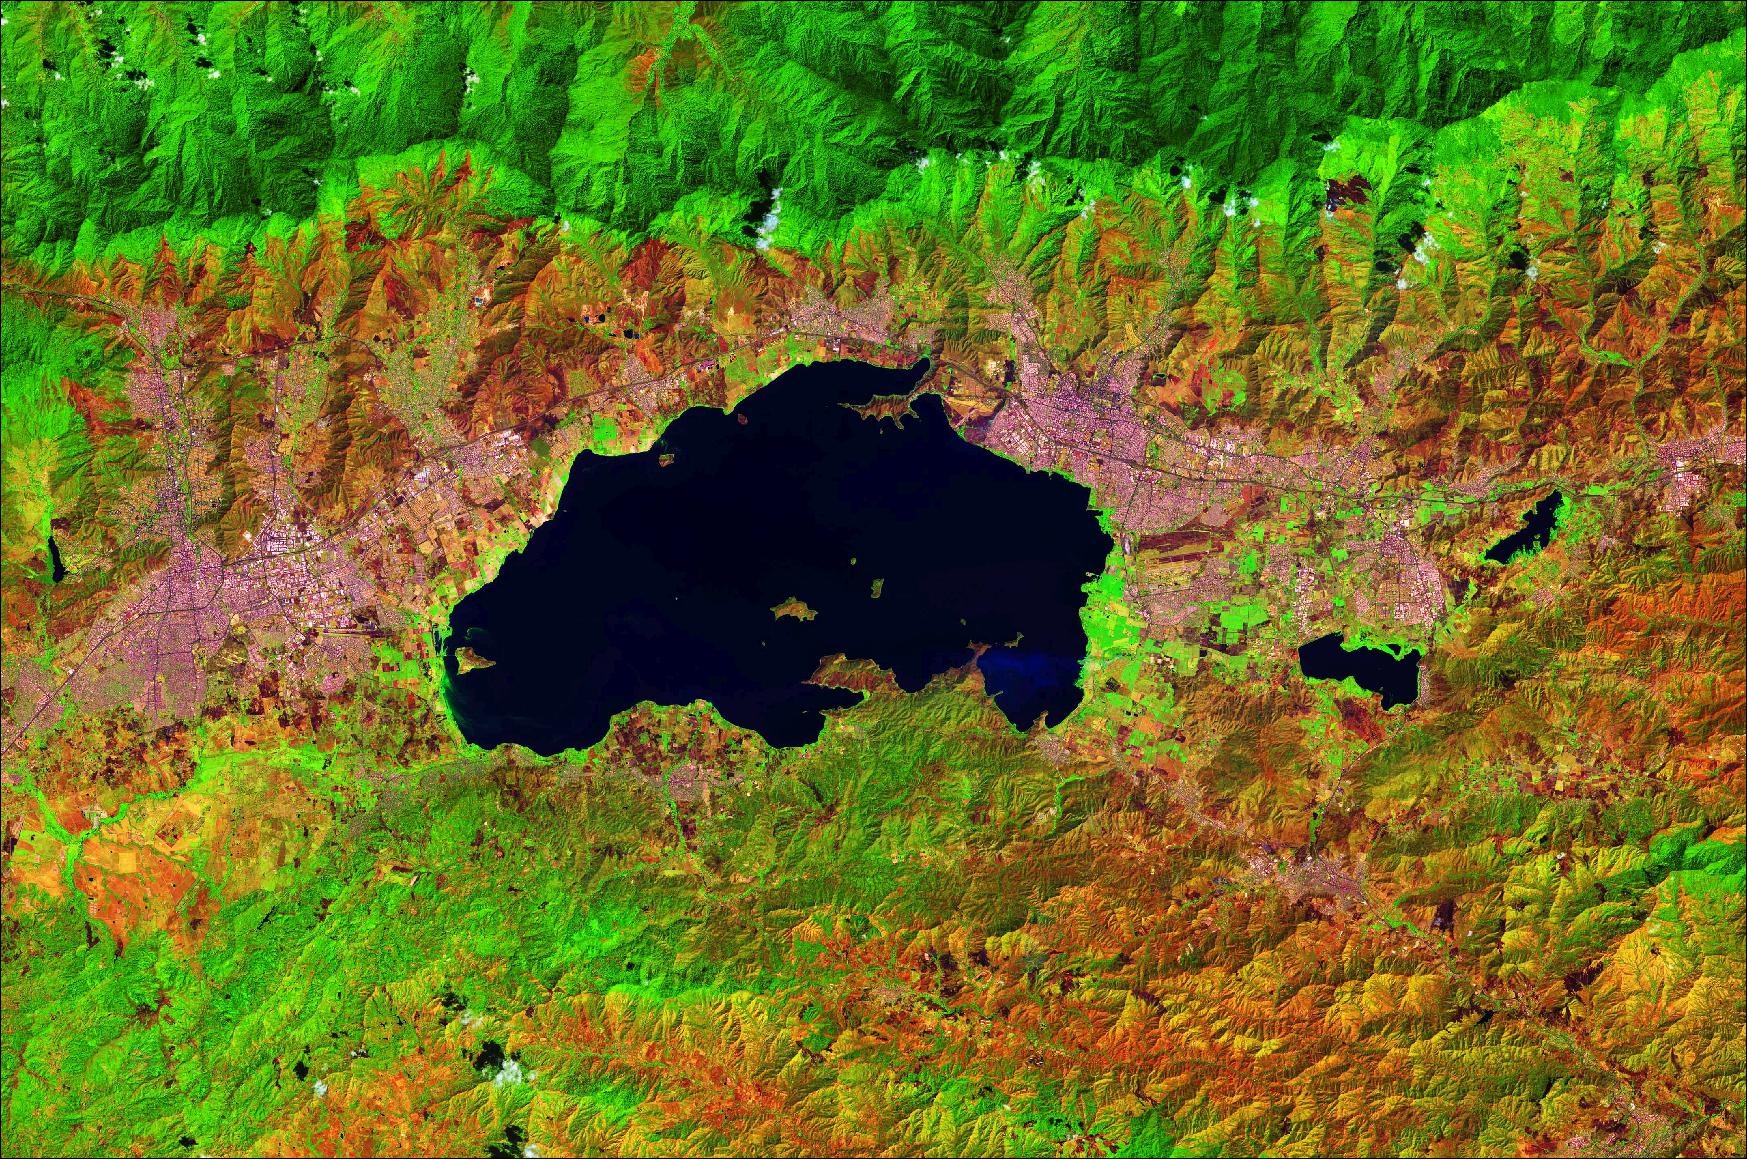 Figure 28: With a surface area of 370 km2, Lake Valencia formed a few million years ago and is now a reservoir for the cities of Valencia on the west shores and Maracay on the east shores. This image, which was captured on 2 February 2019 with Sentinel-2, is also featured on the Earth from Space video program (image credit: ESA, the image contains modified Copernicus Sentinel data (2019), processed by ESA, CC BY-SA 3.0 IGO)